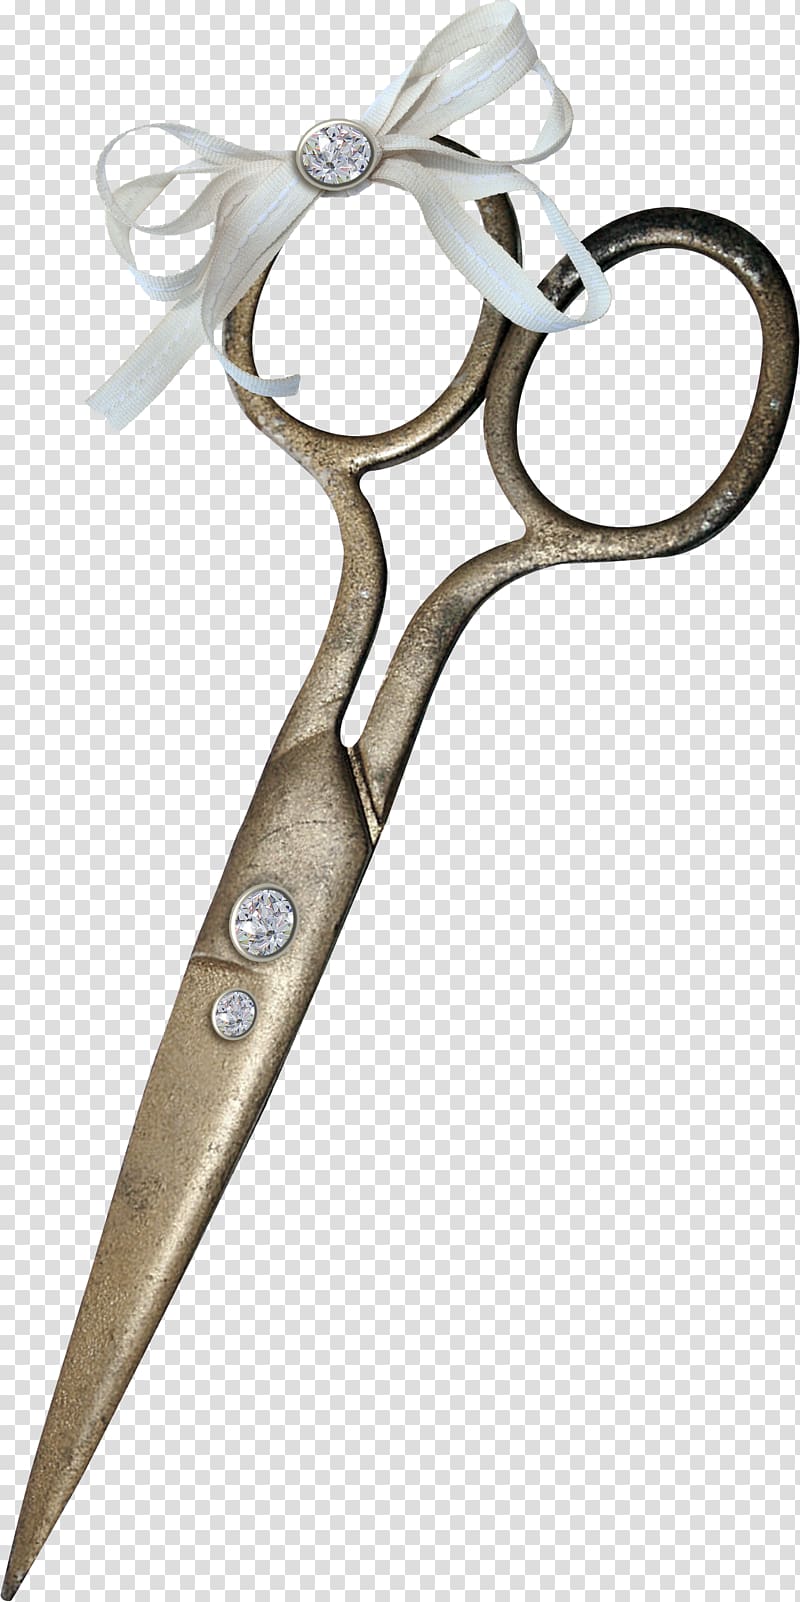 Scissors Snipping Tool, barometer transparent background PNG clipart